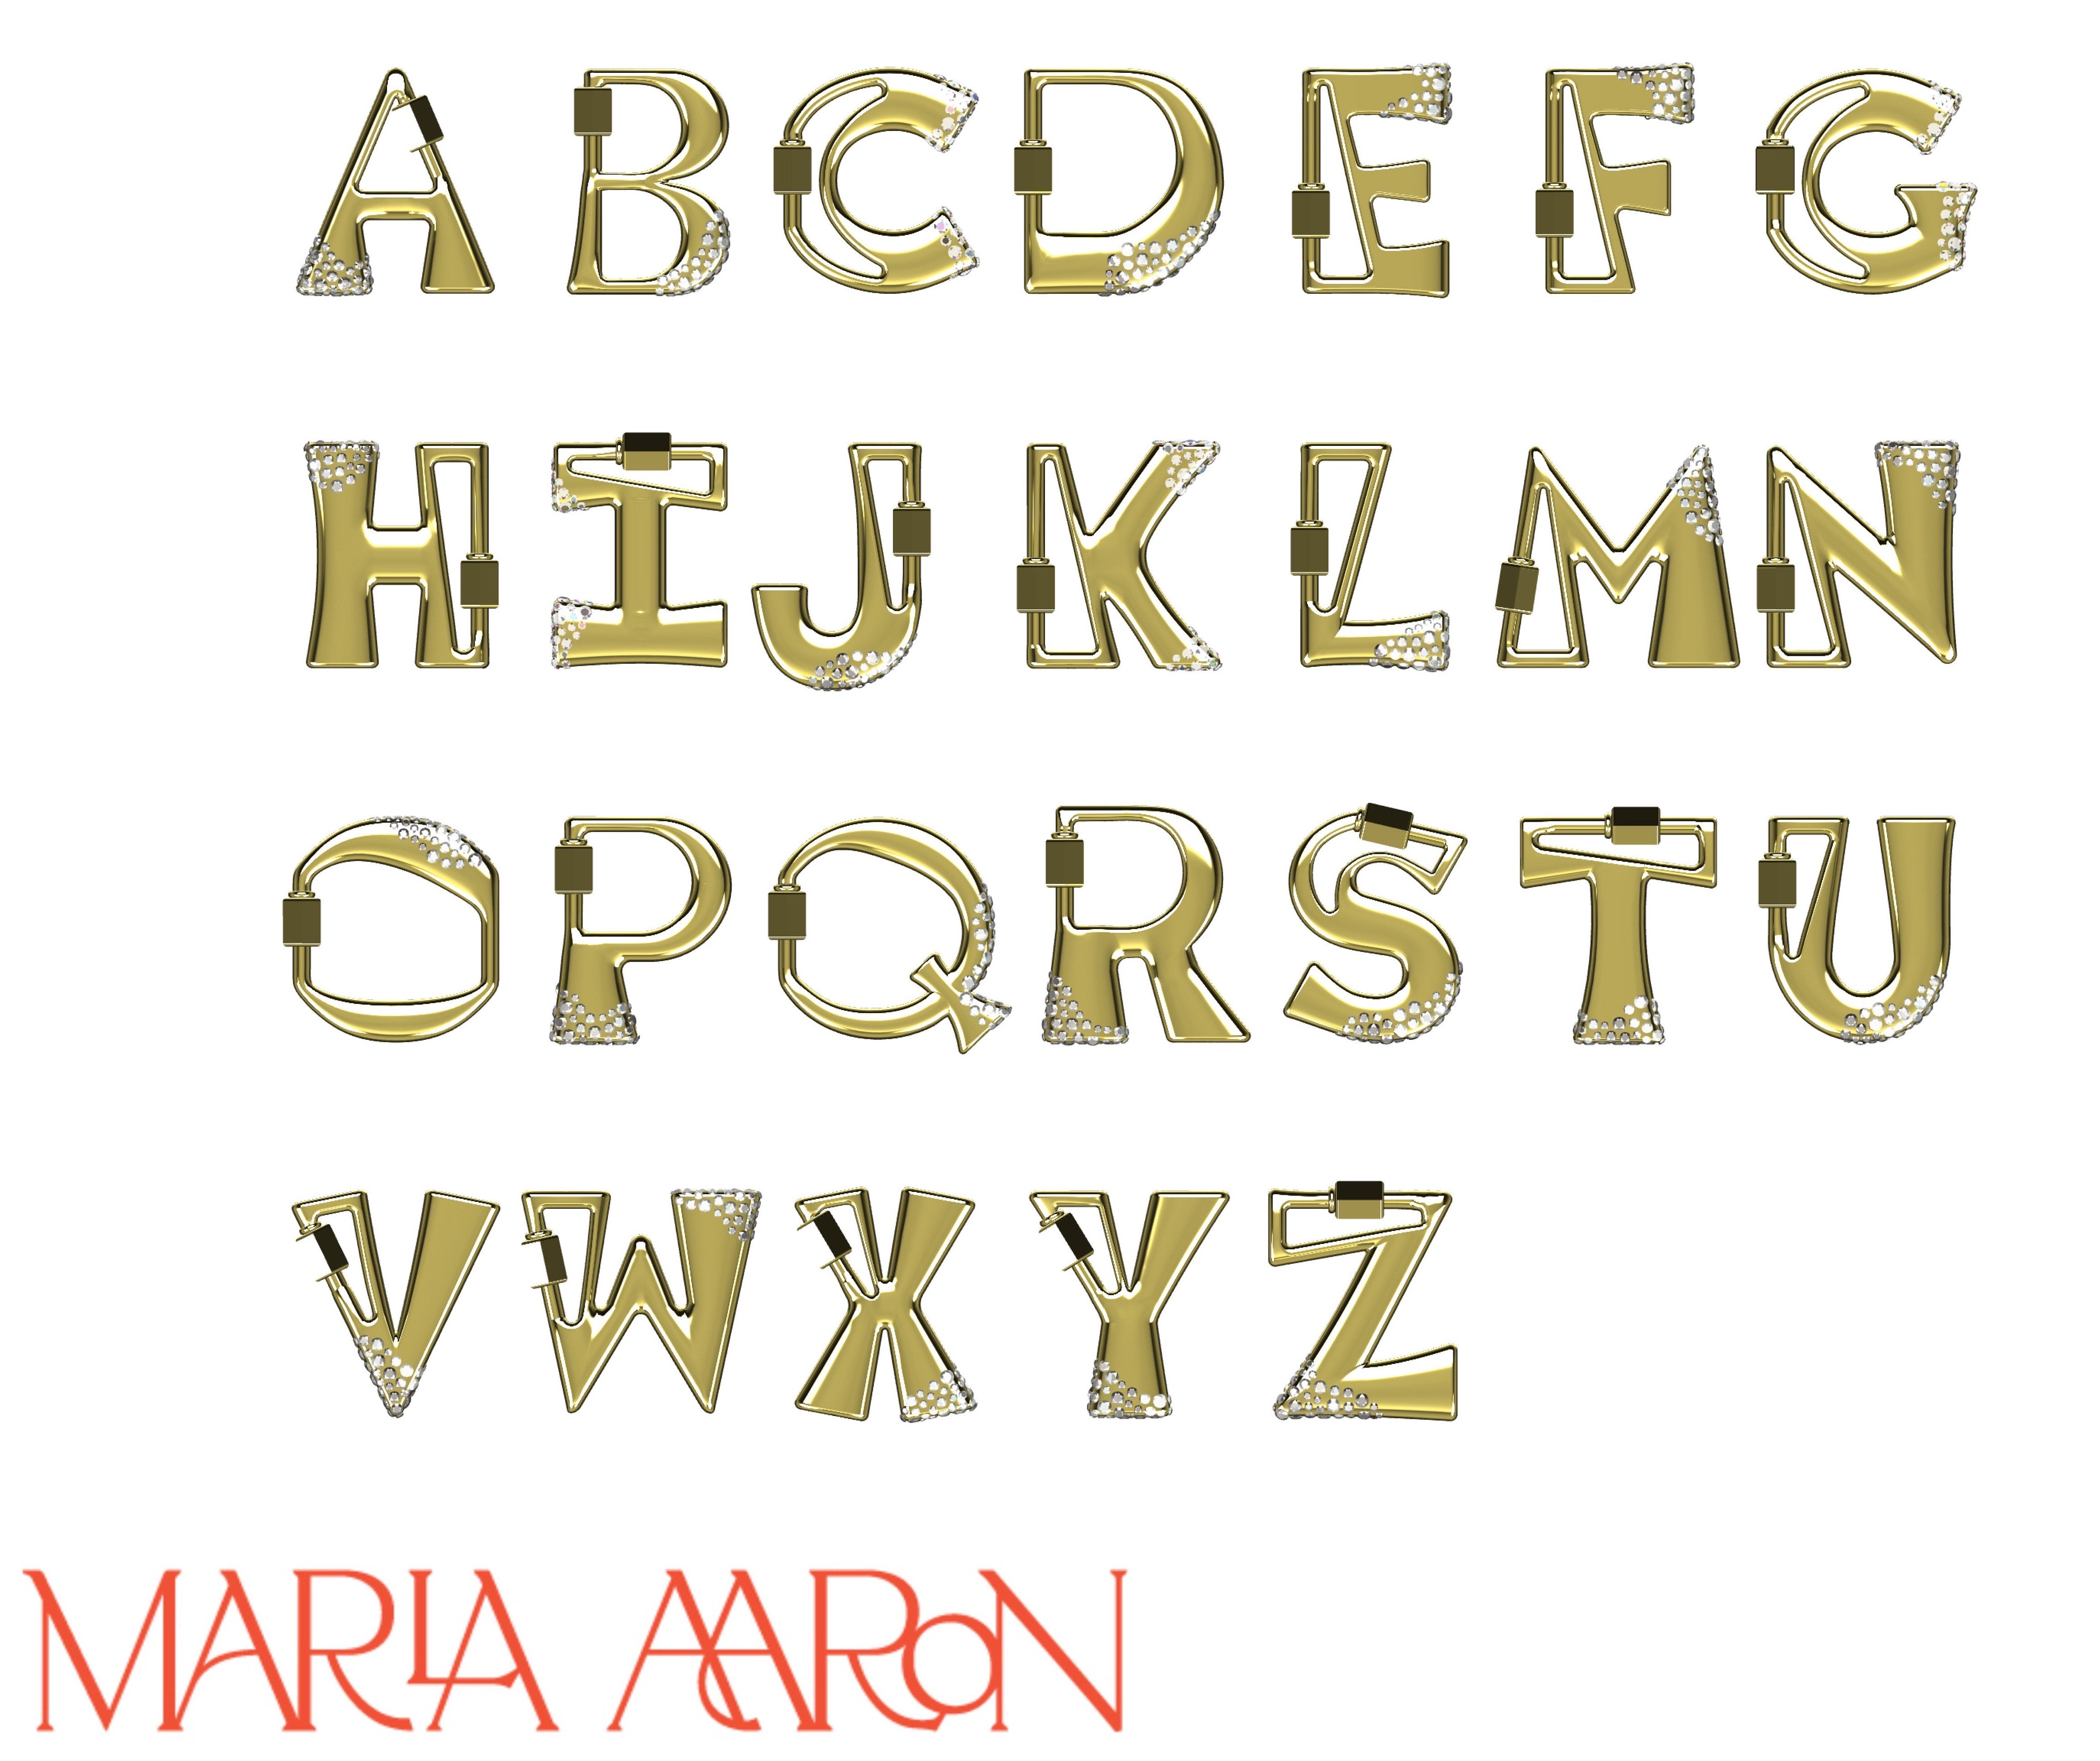 Gold locks of every letter of the alphabet including P charm against white backdrop with Marla Aaron logo in bottom left corner